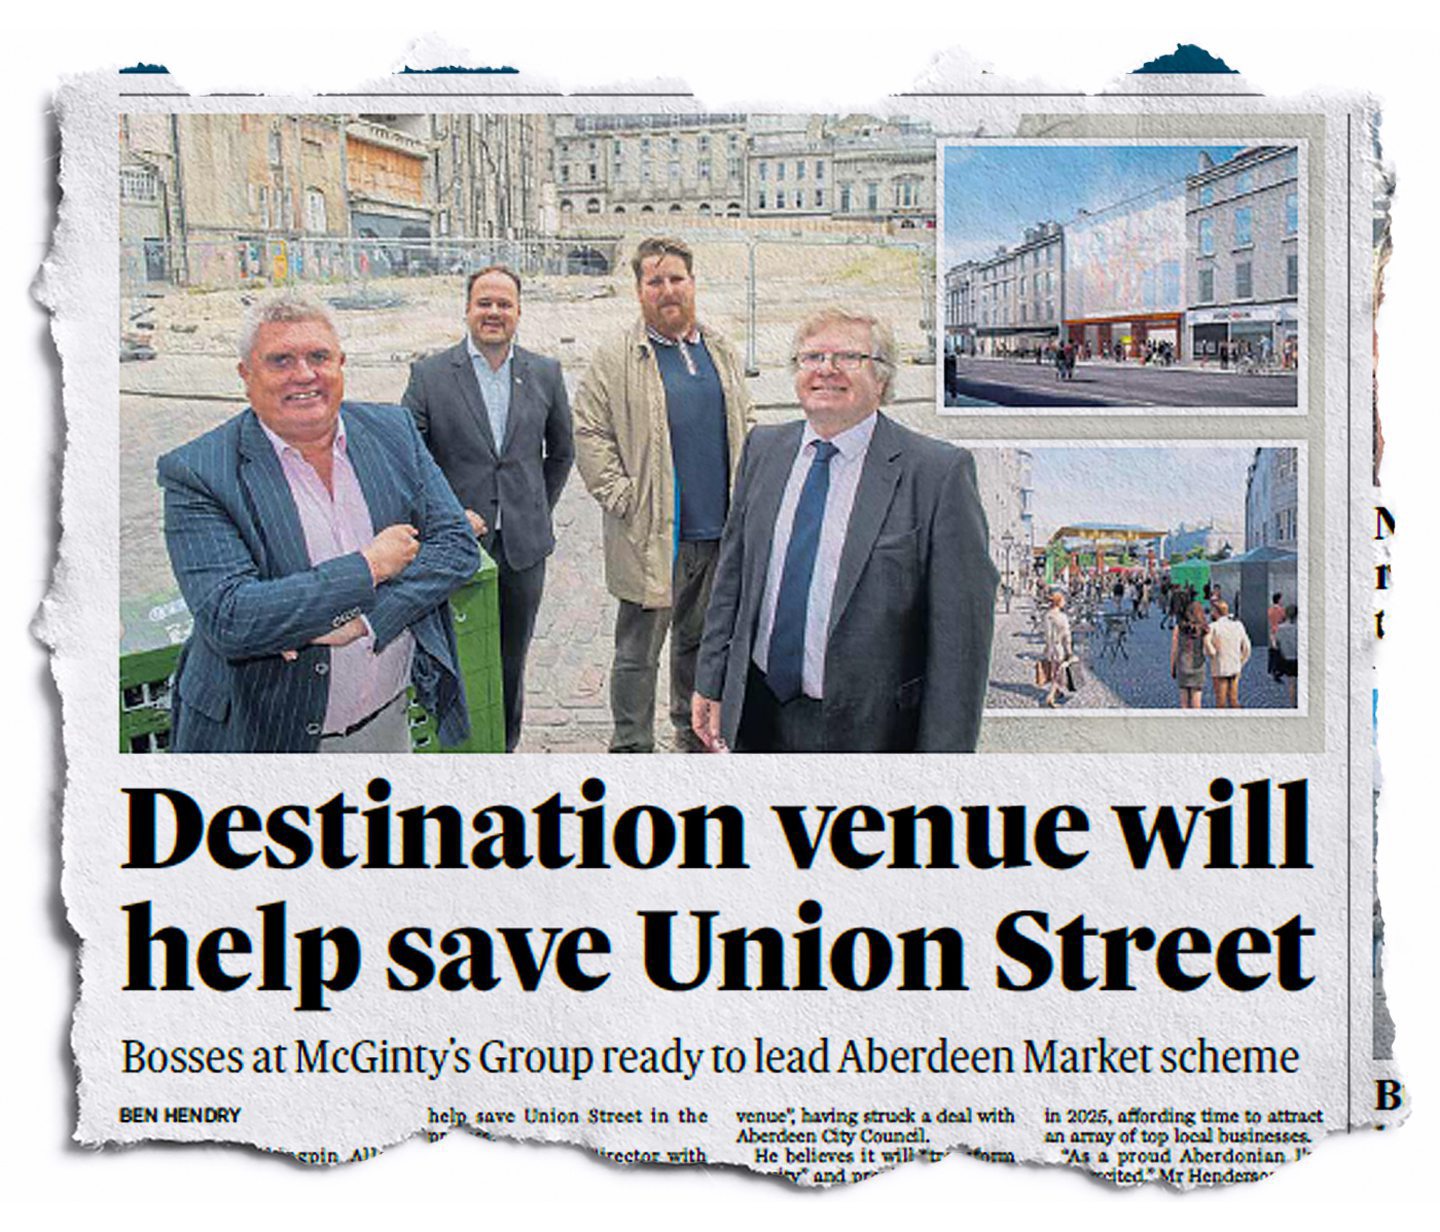 The McGinty's Group's plans for the market were on the front page of The Press and Journal with the headline reading 'Destination venue will help save Union Street'